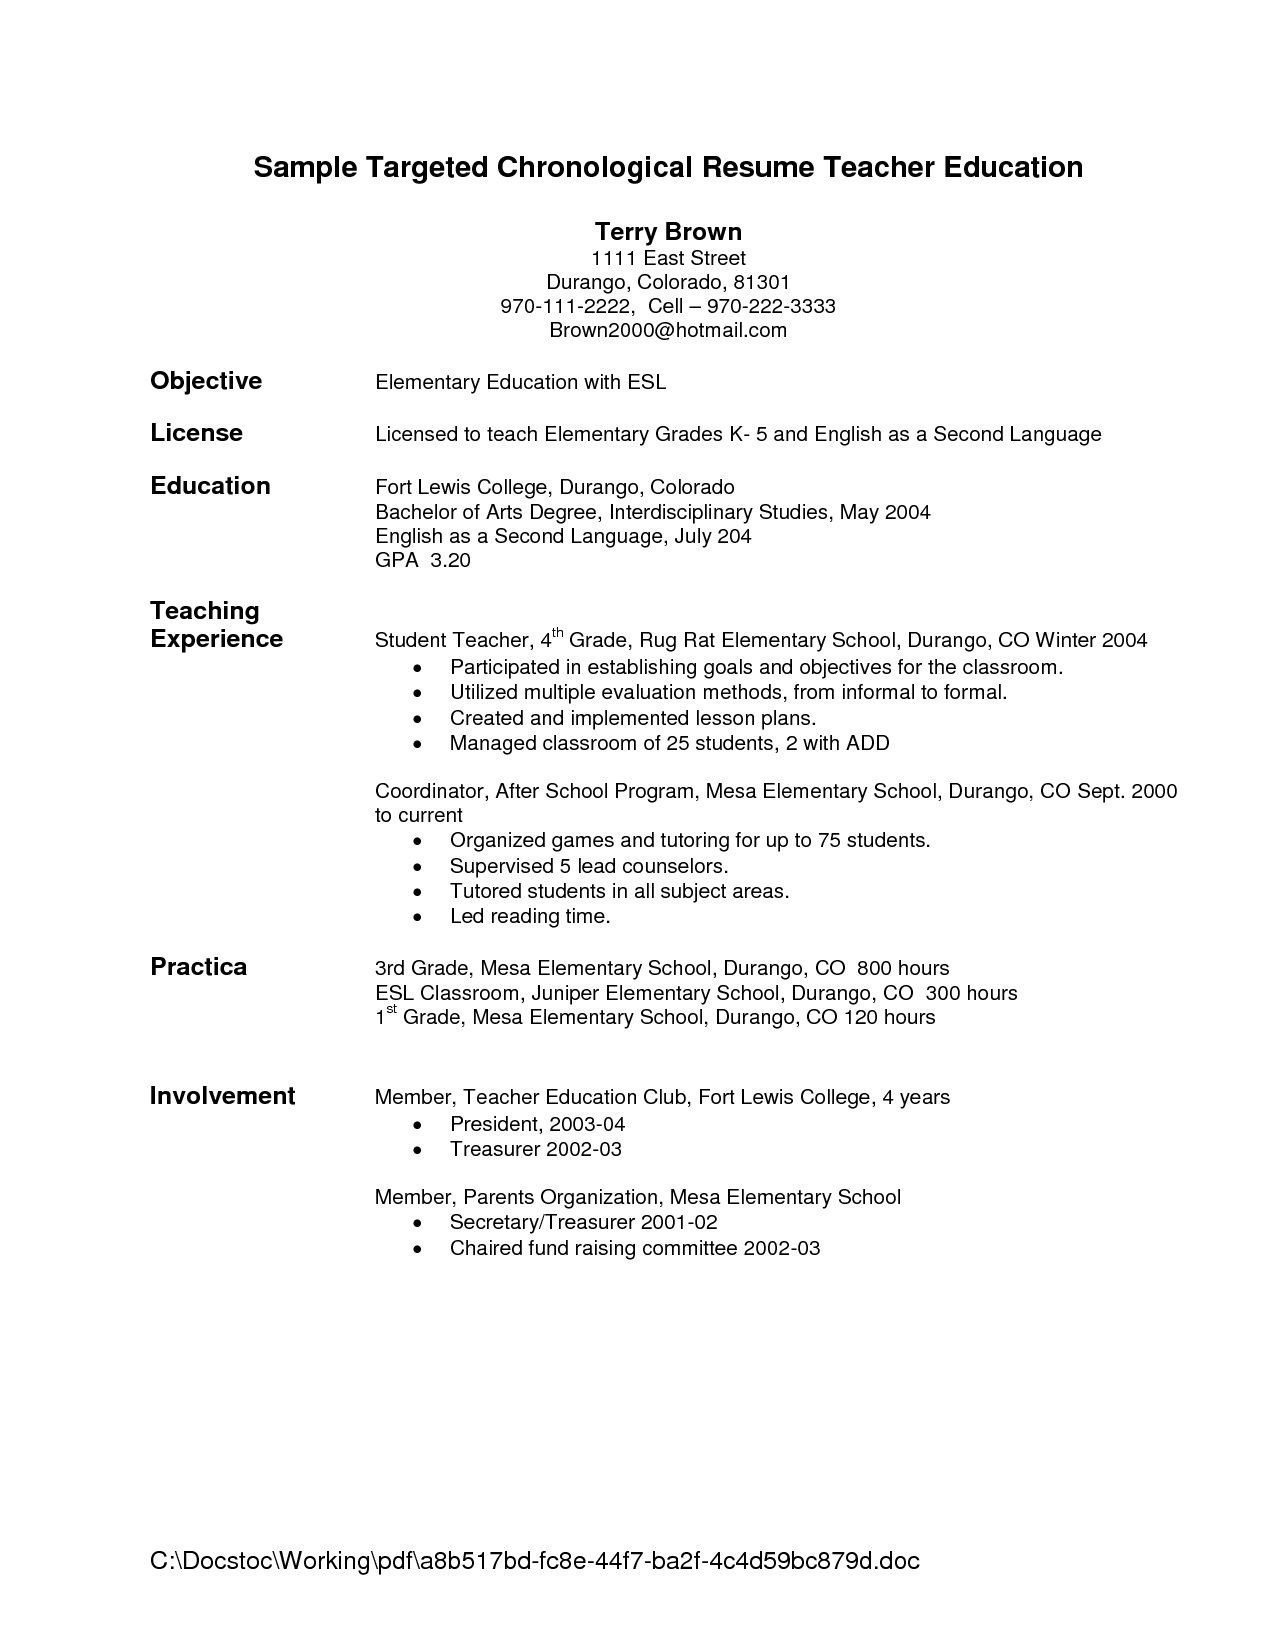 Sample Objectives for Resumes Higher Education Jobs Pin On School Ideas